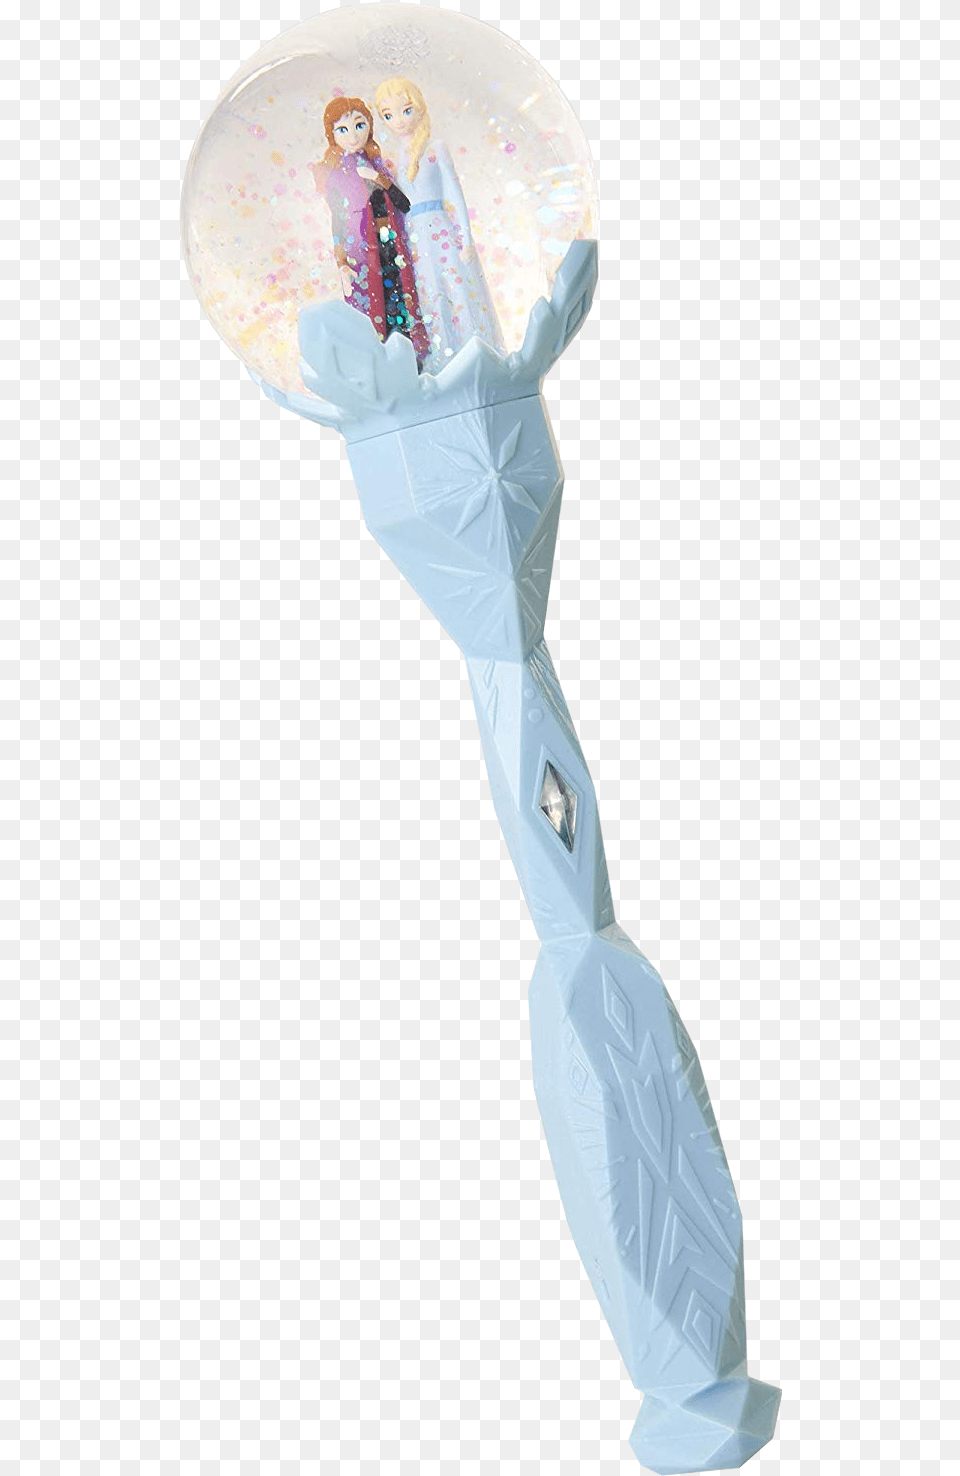 Sisters Musical Snow Sceptre Disney Frozen Frozen 2 Sisters Snow Scepter, Cutlery, Spoon, Adult, Wedding Free Transparent Png